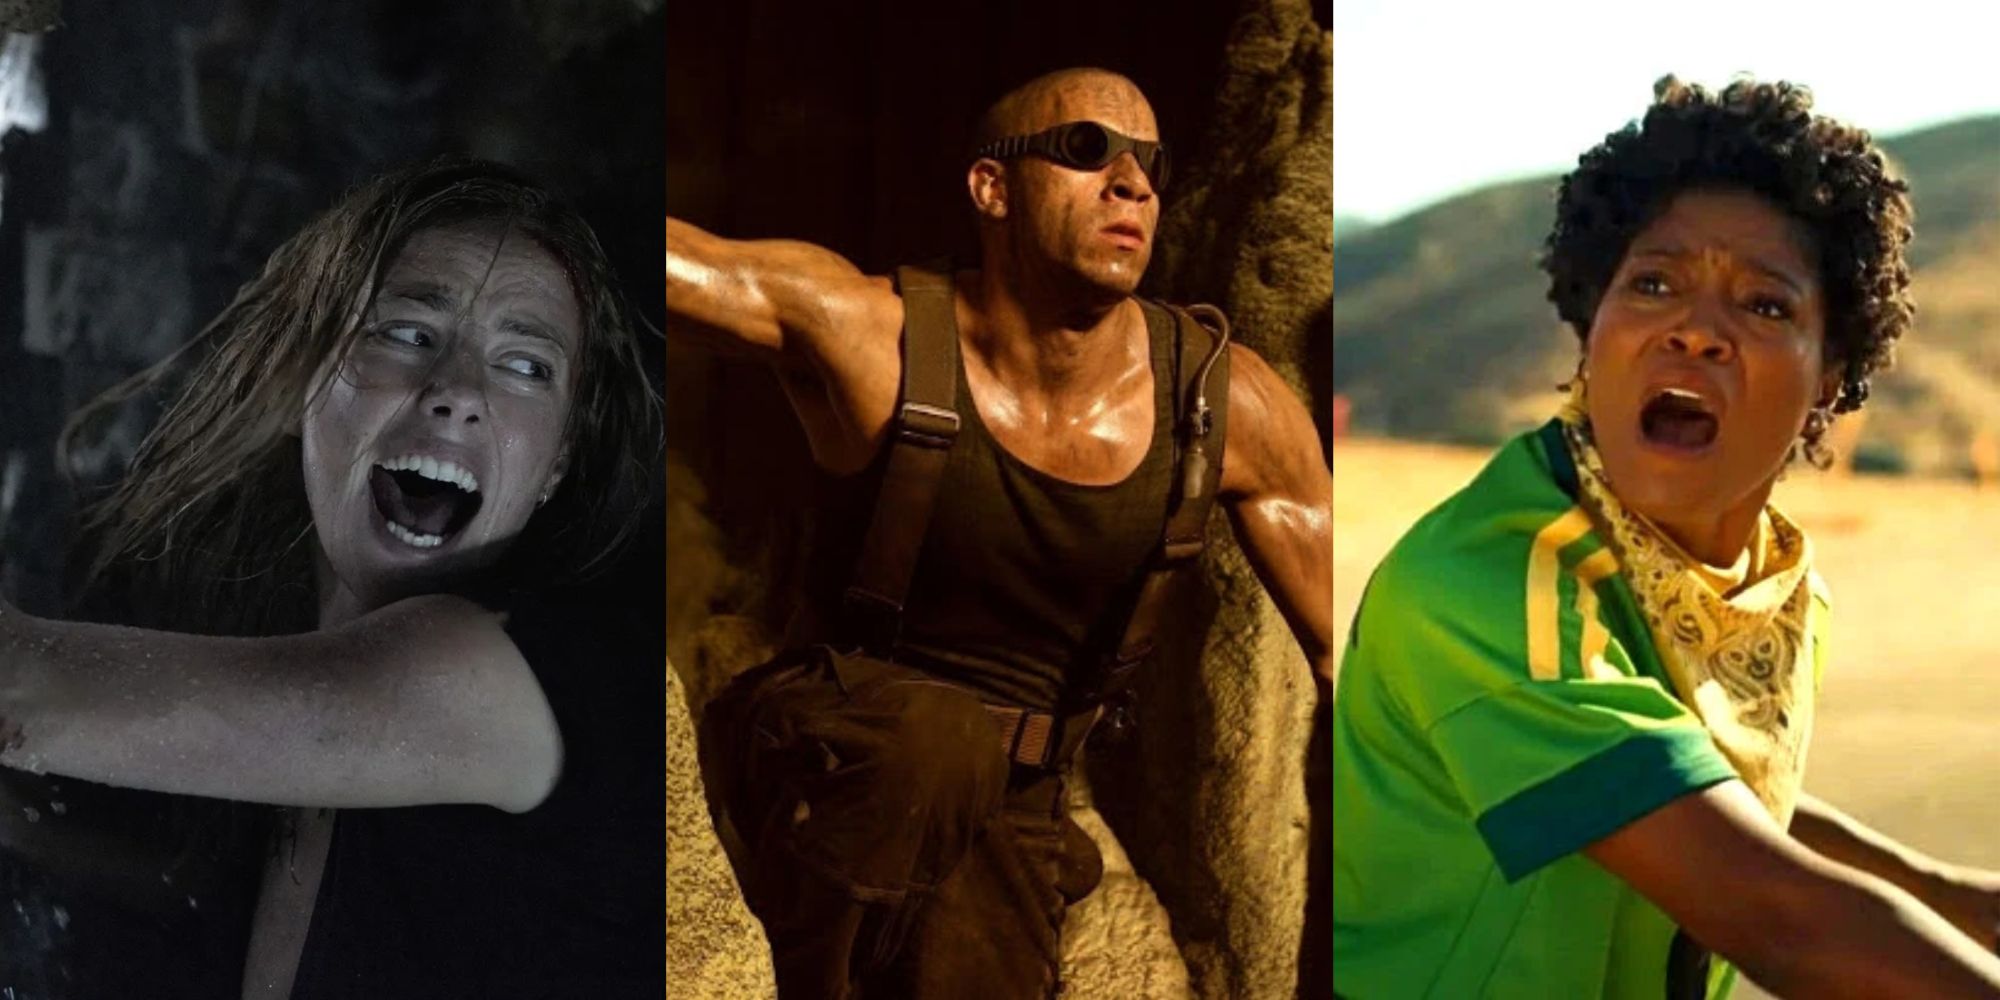 A split image of Haley from Crawl, Riddick from Pitch Black, and Emerald from Nope